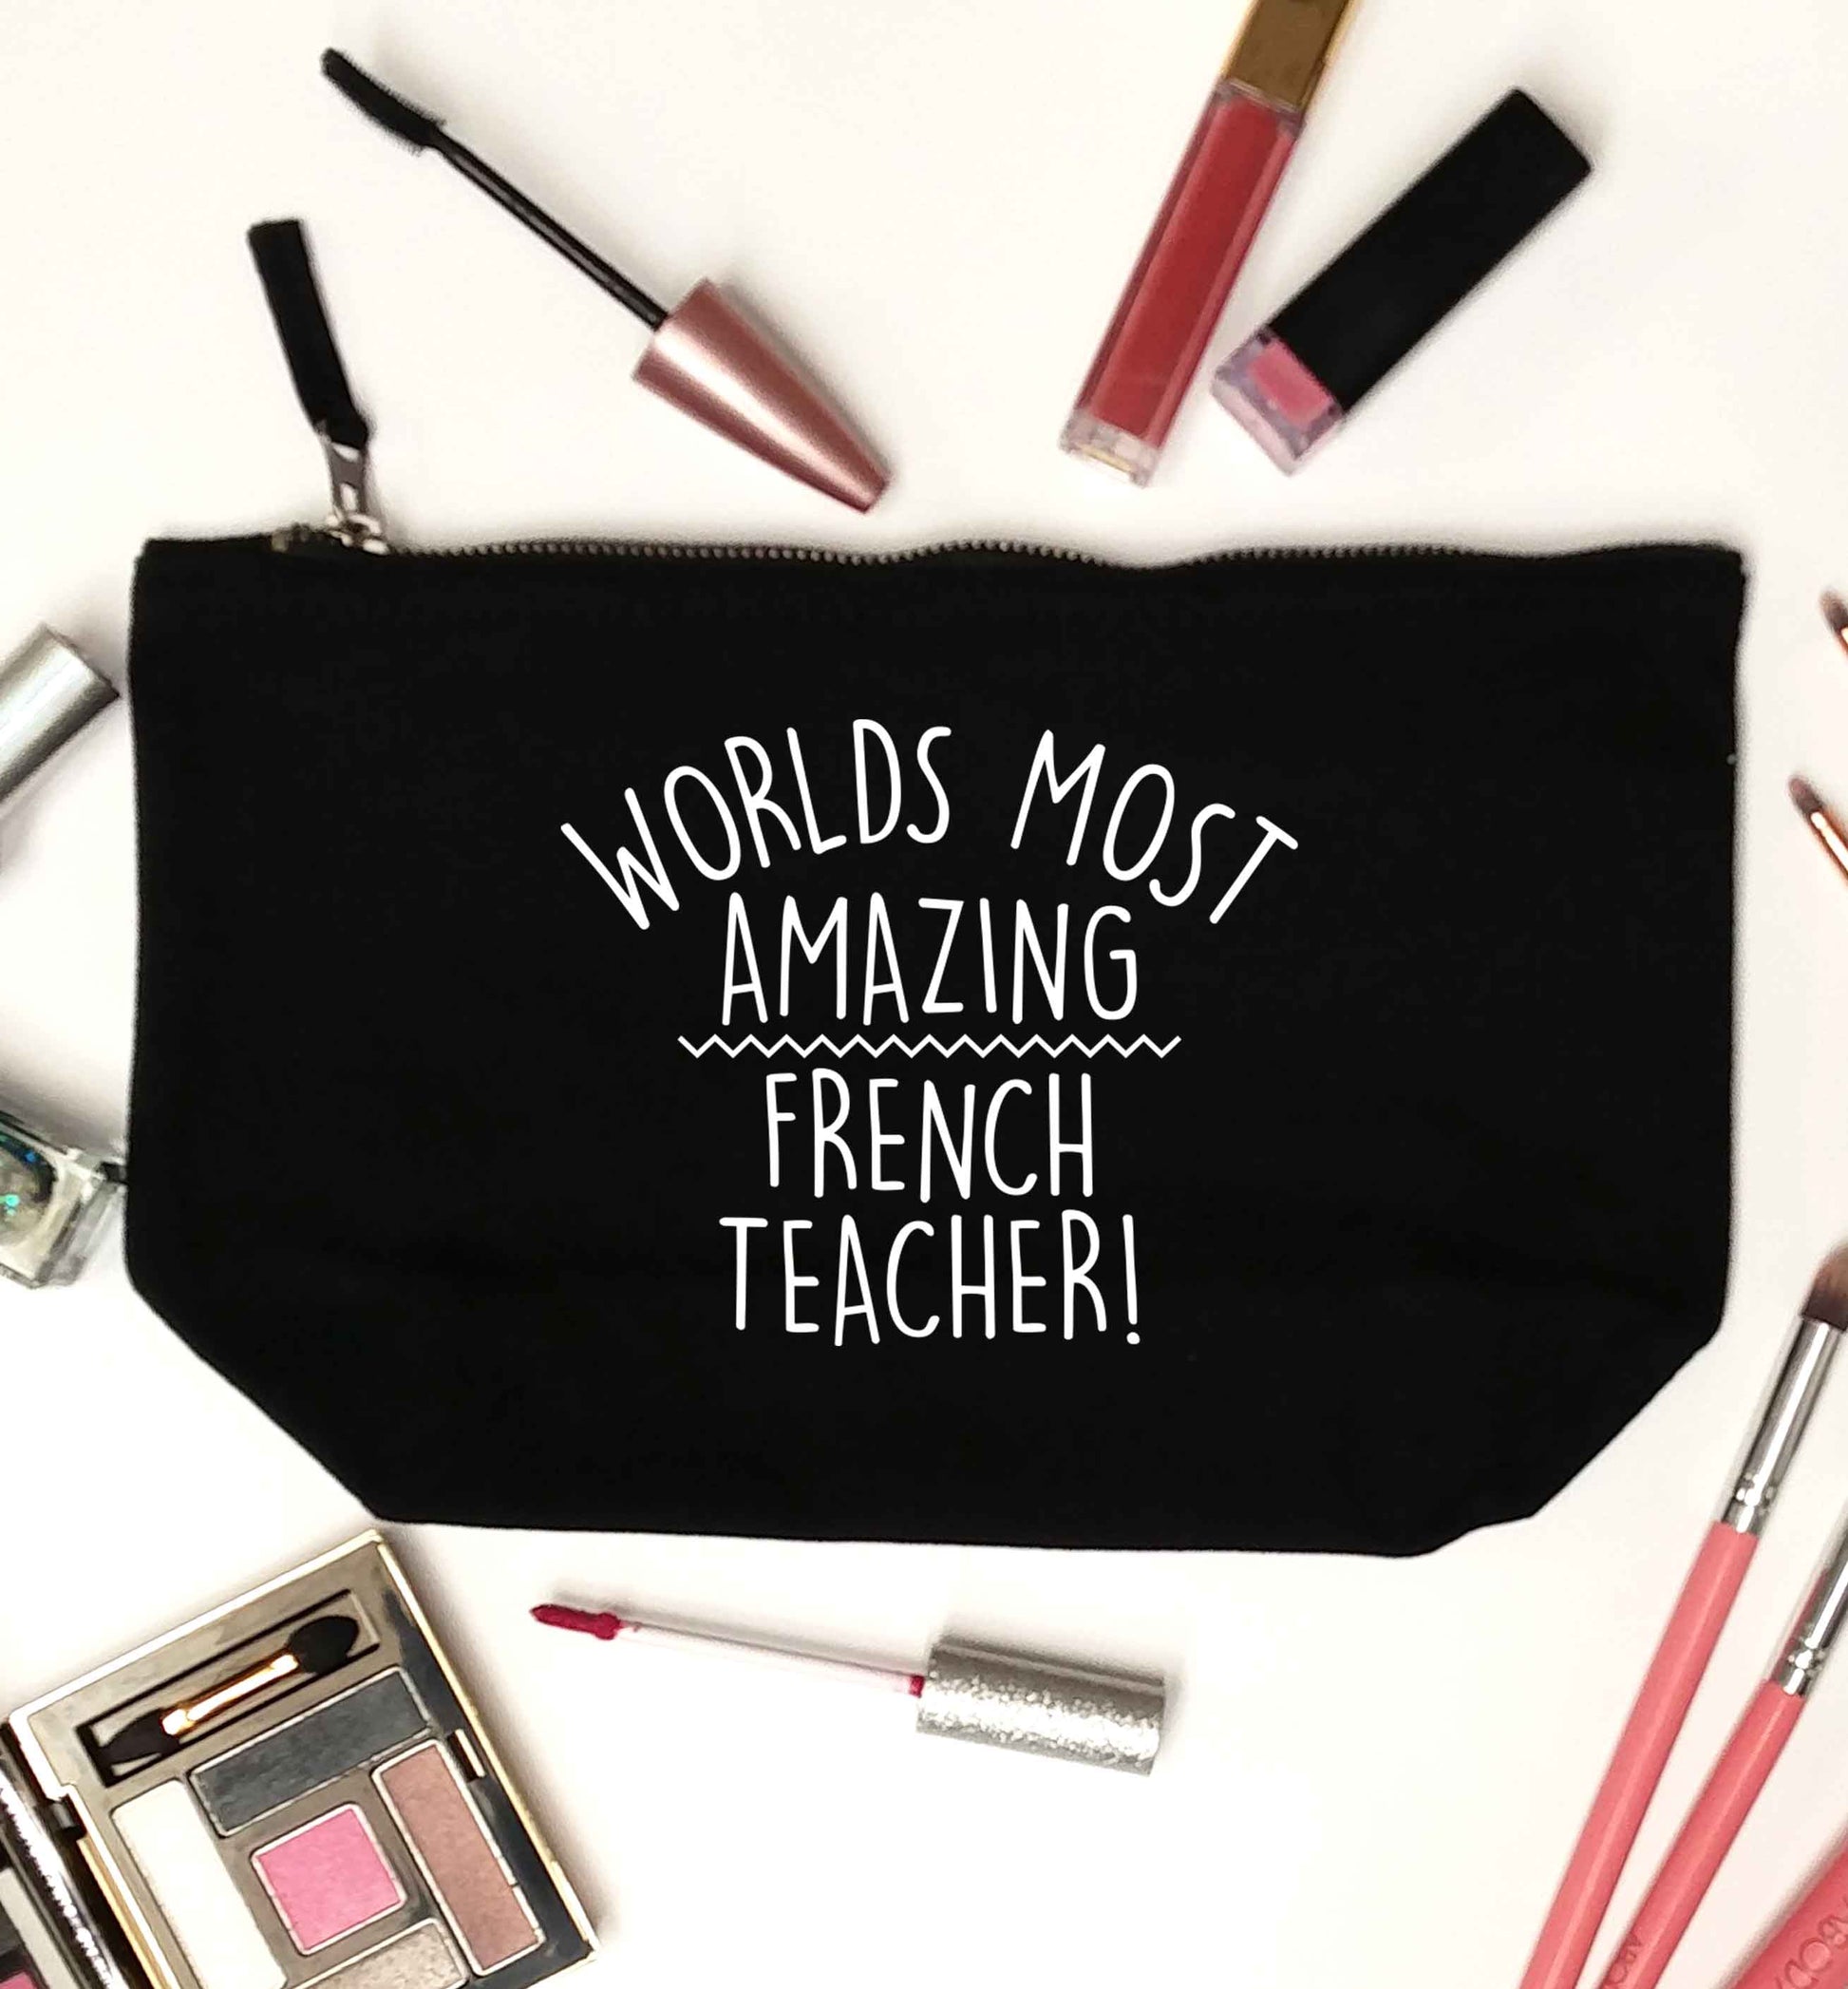 Worlds most amazing French teacher black makeup bag